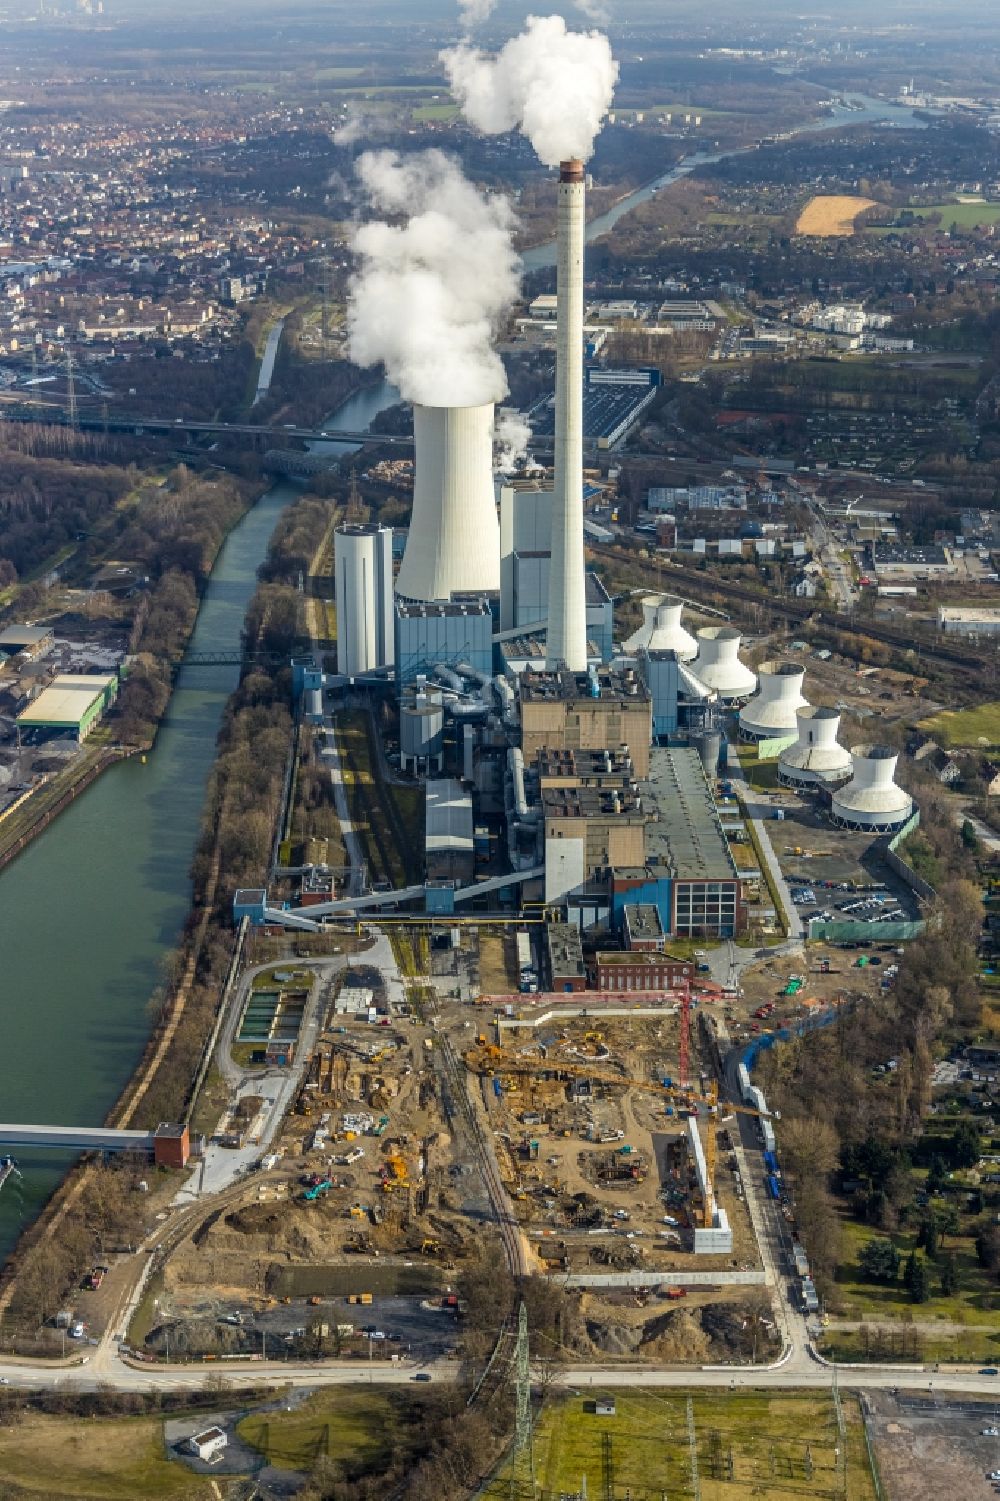 Aerial image Herne - Construction site for the new construction of the power plants of a gas and steam power plant of STEAG GmbH in Herne in the federal state of North Rhine-Westphalia, Germany